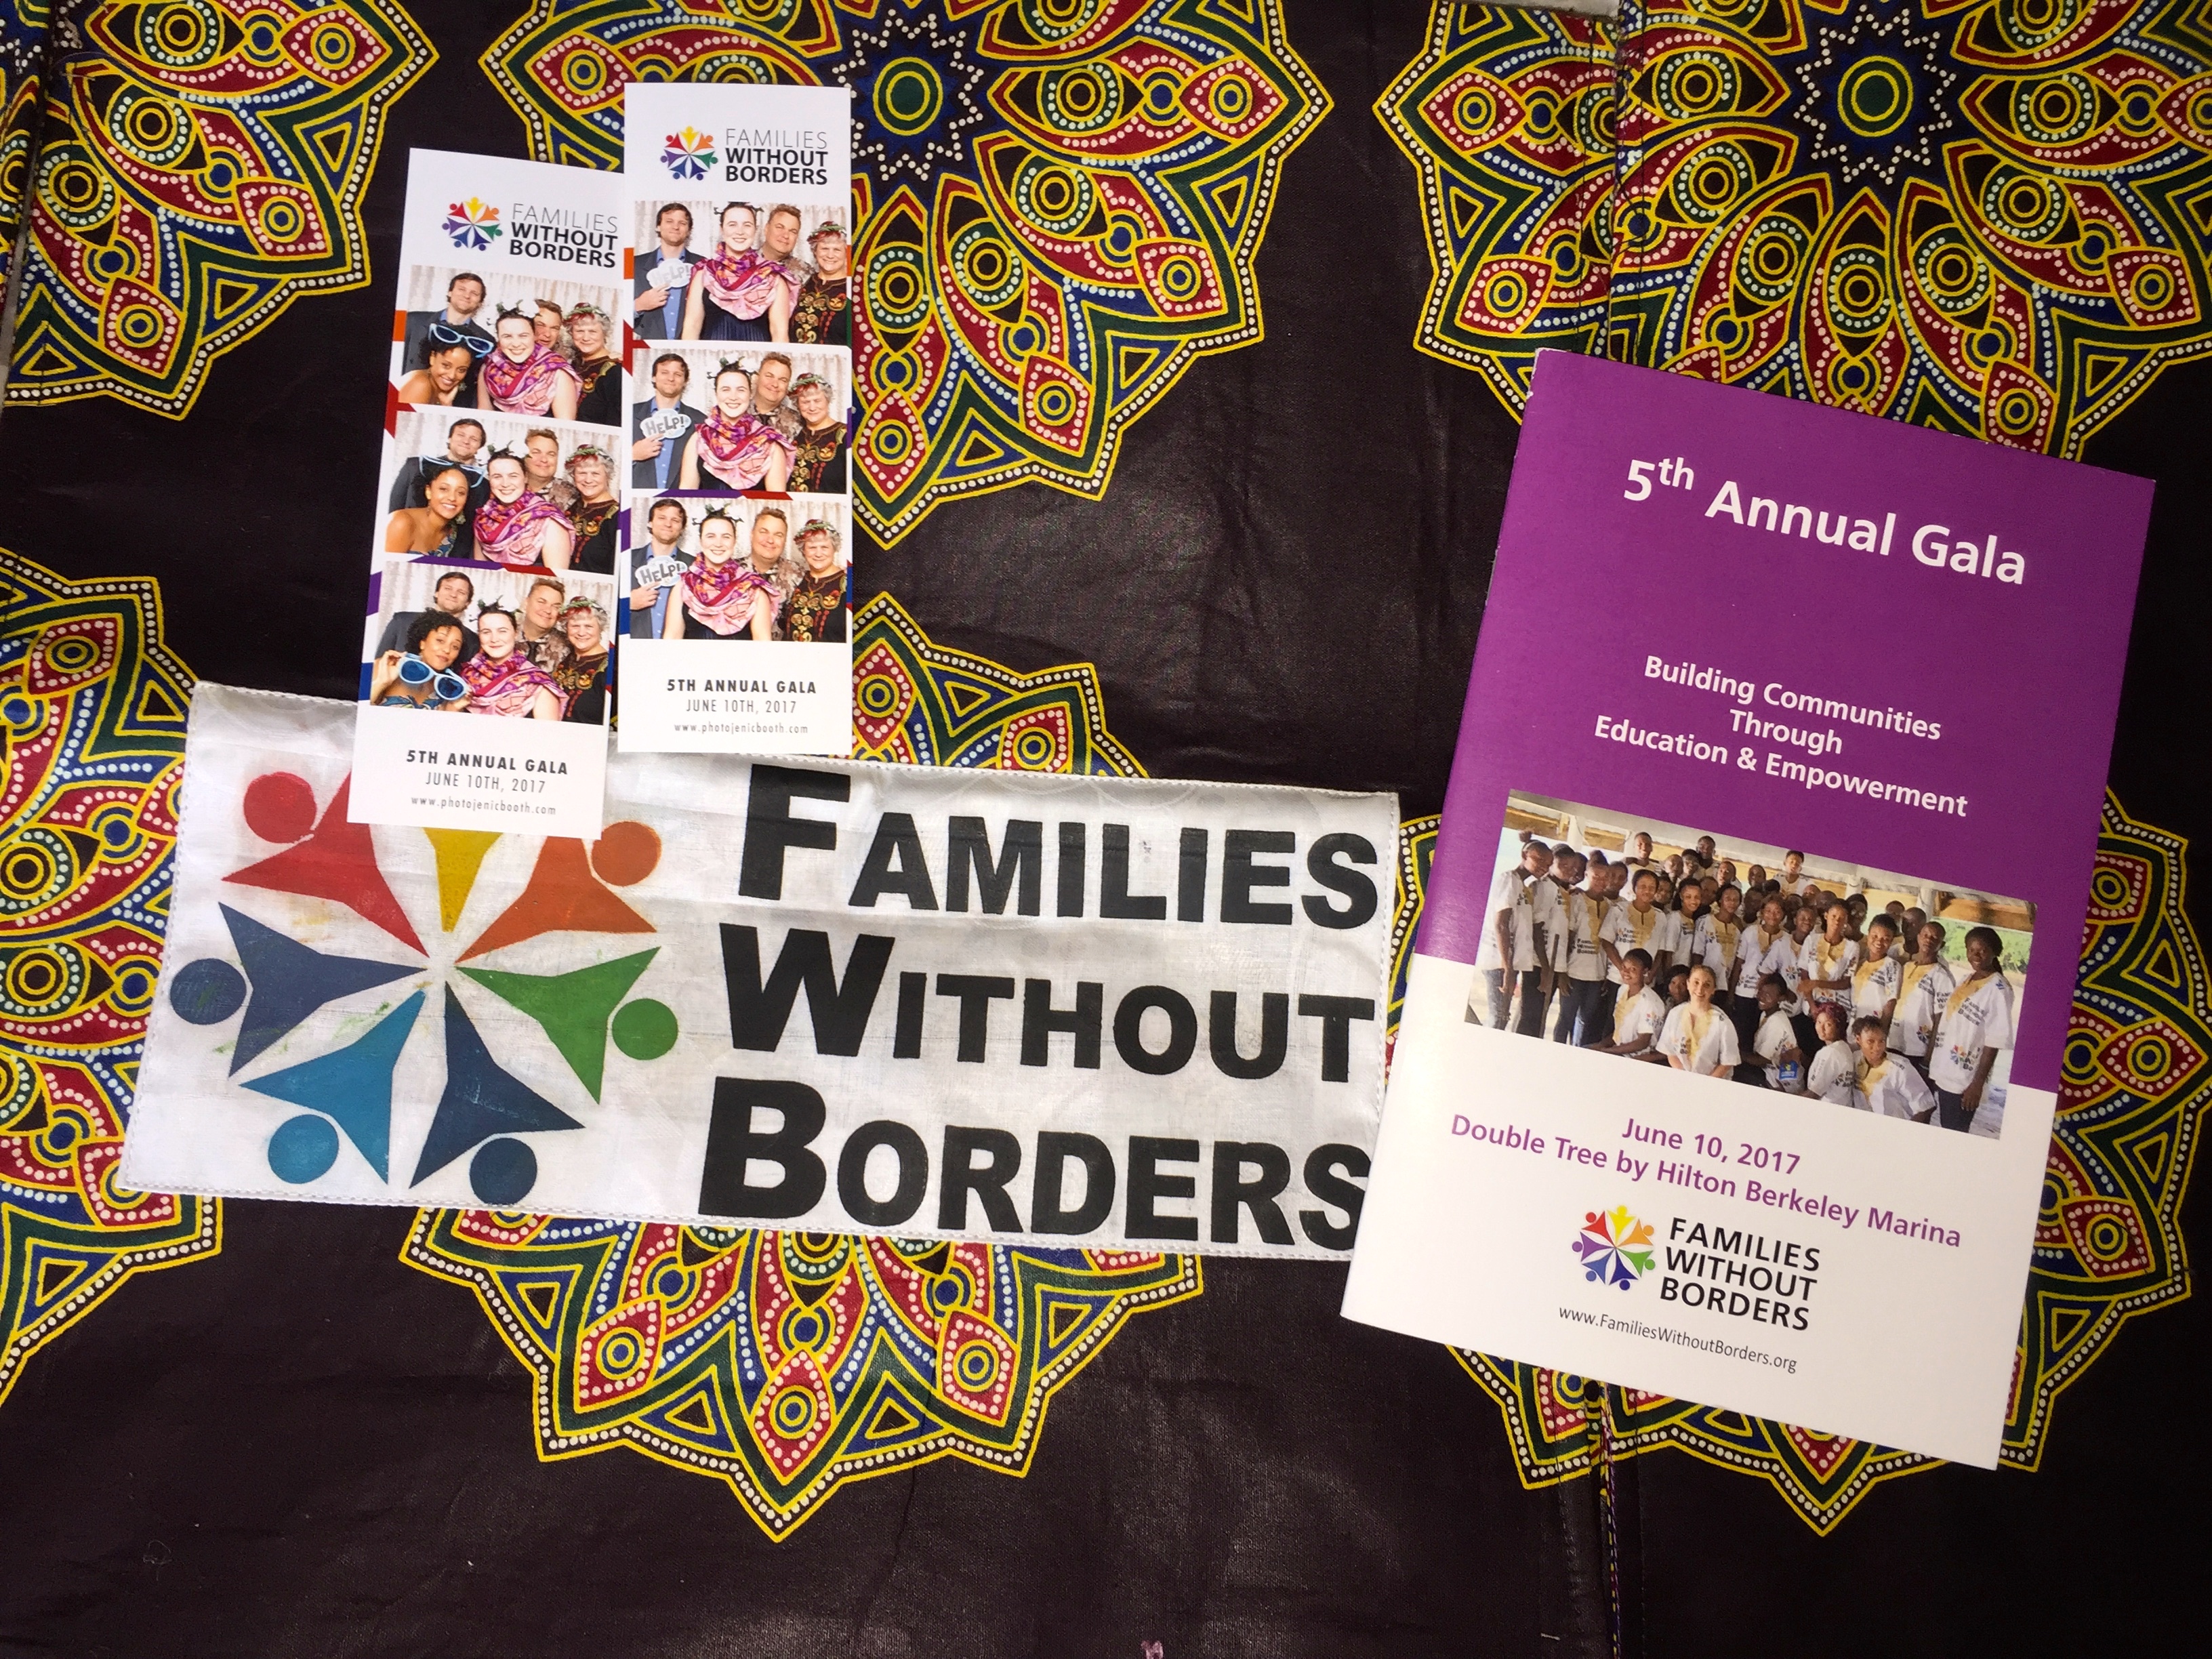 Families Without Borders Gala 10 June 2017